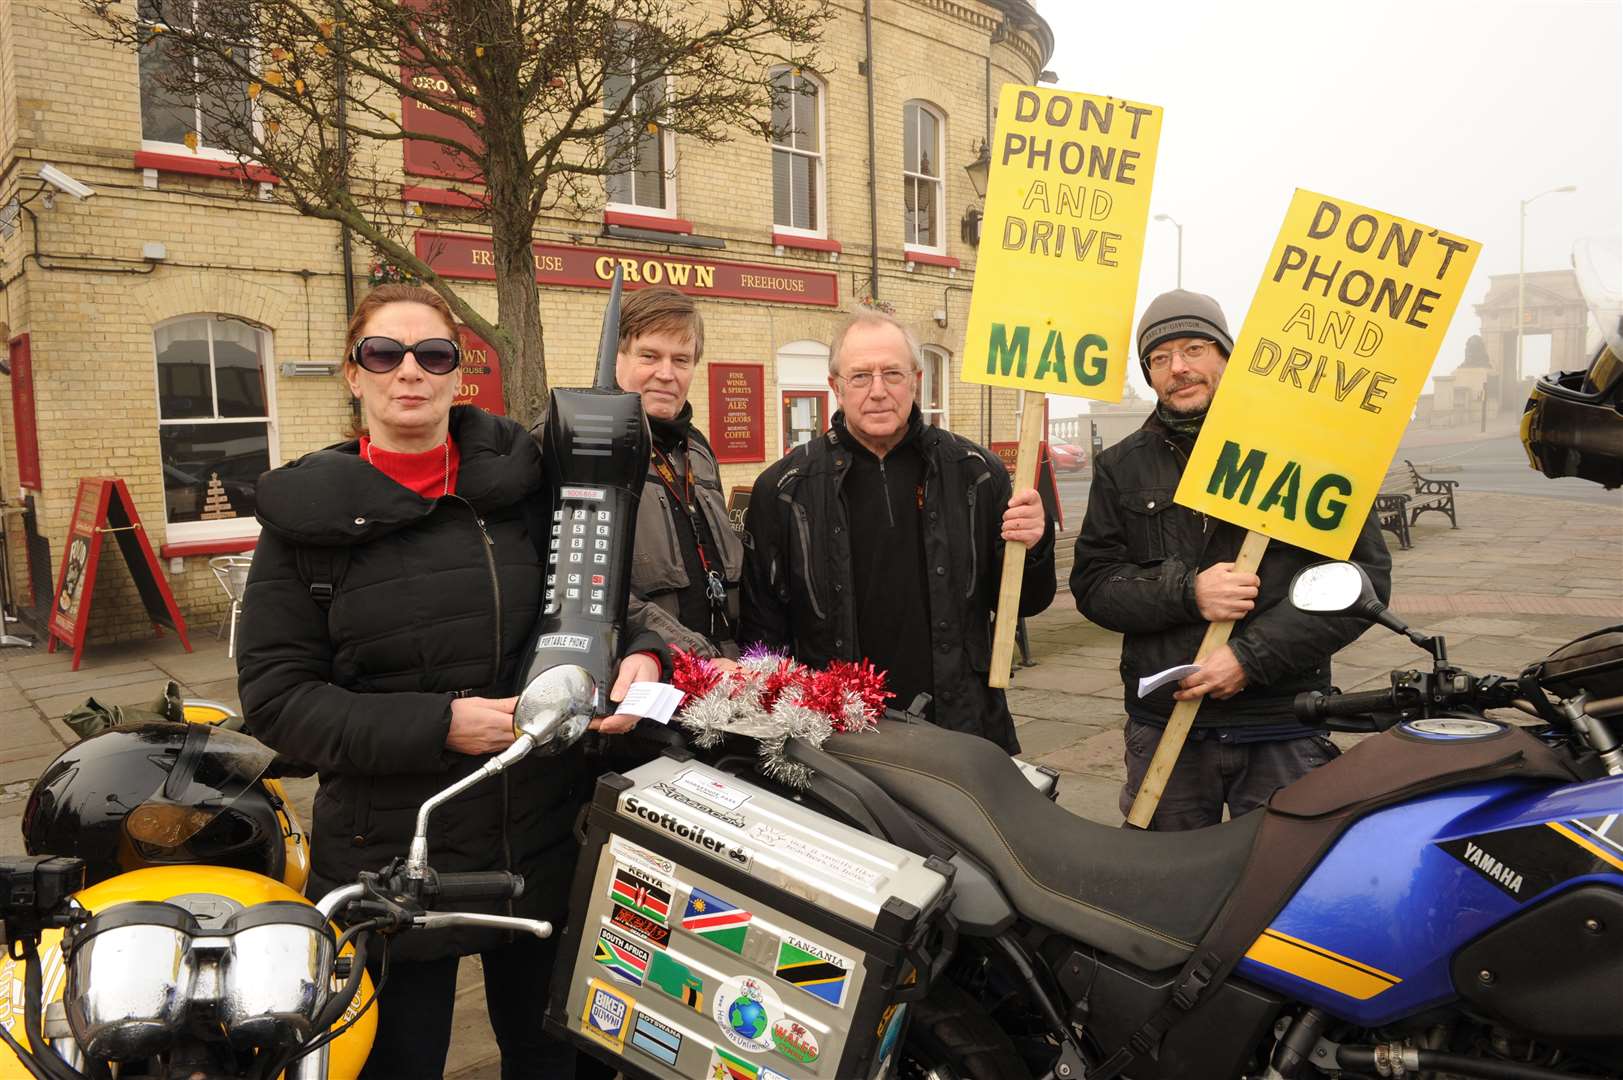 MAG members holding a peaceful demo about drivers using mobile phones